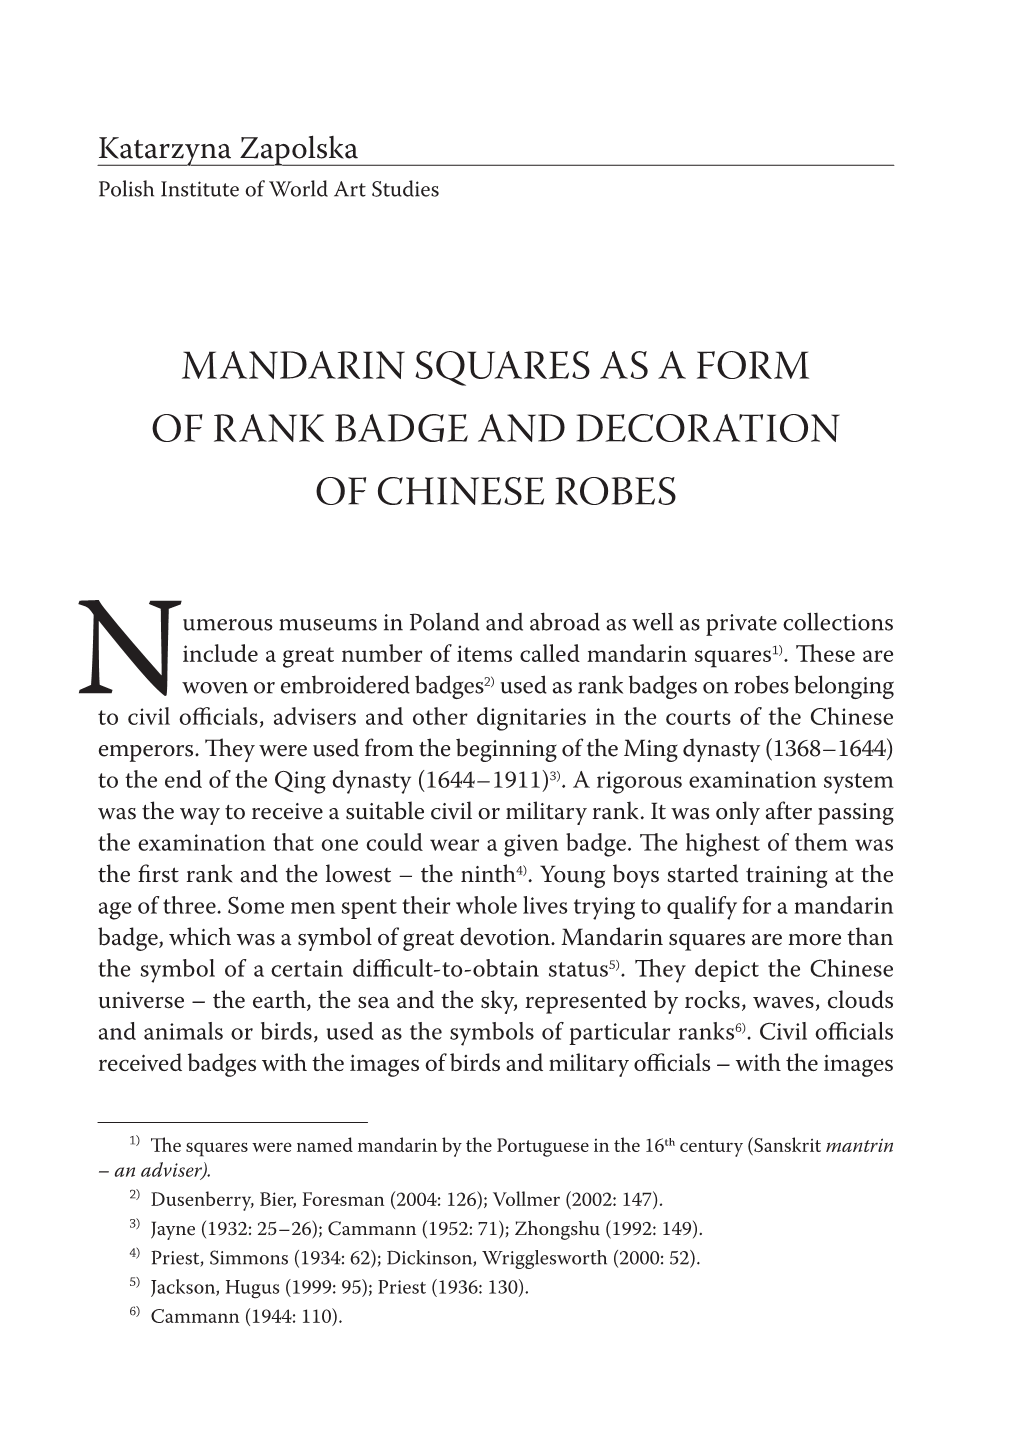 Mandarin Squares As a Form of Rank Badge and Decoration of Chinese Robes